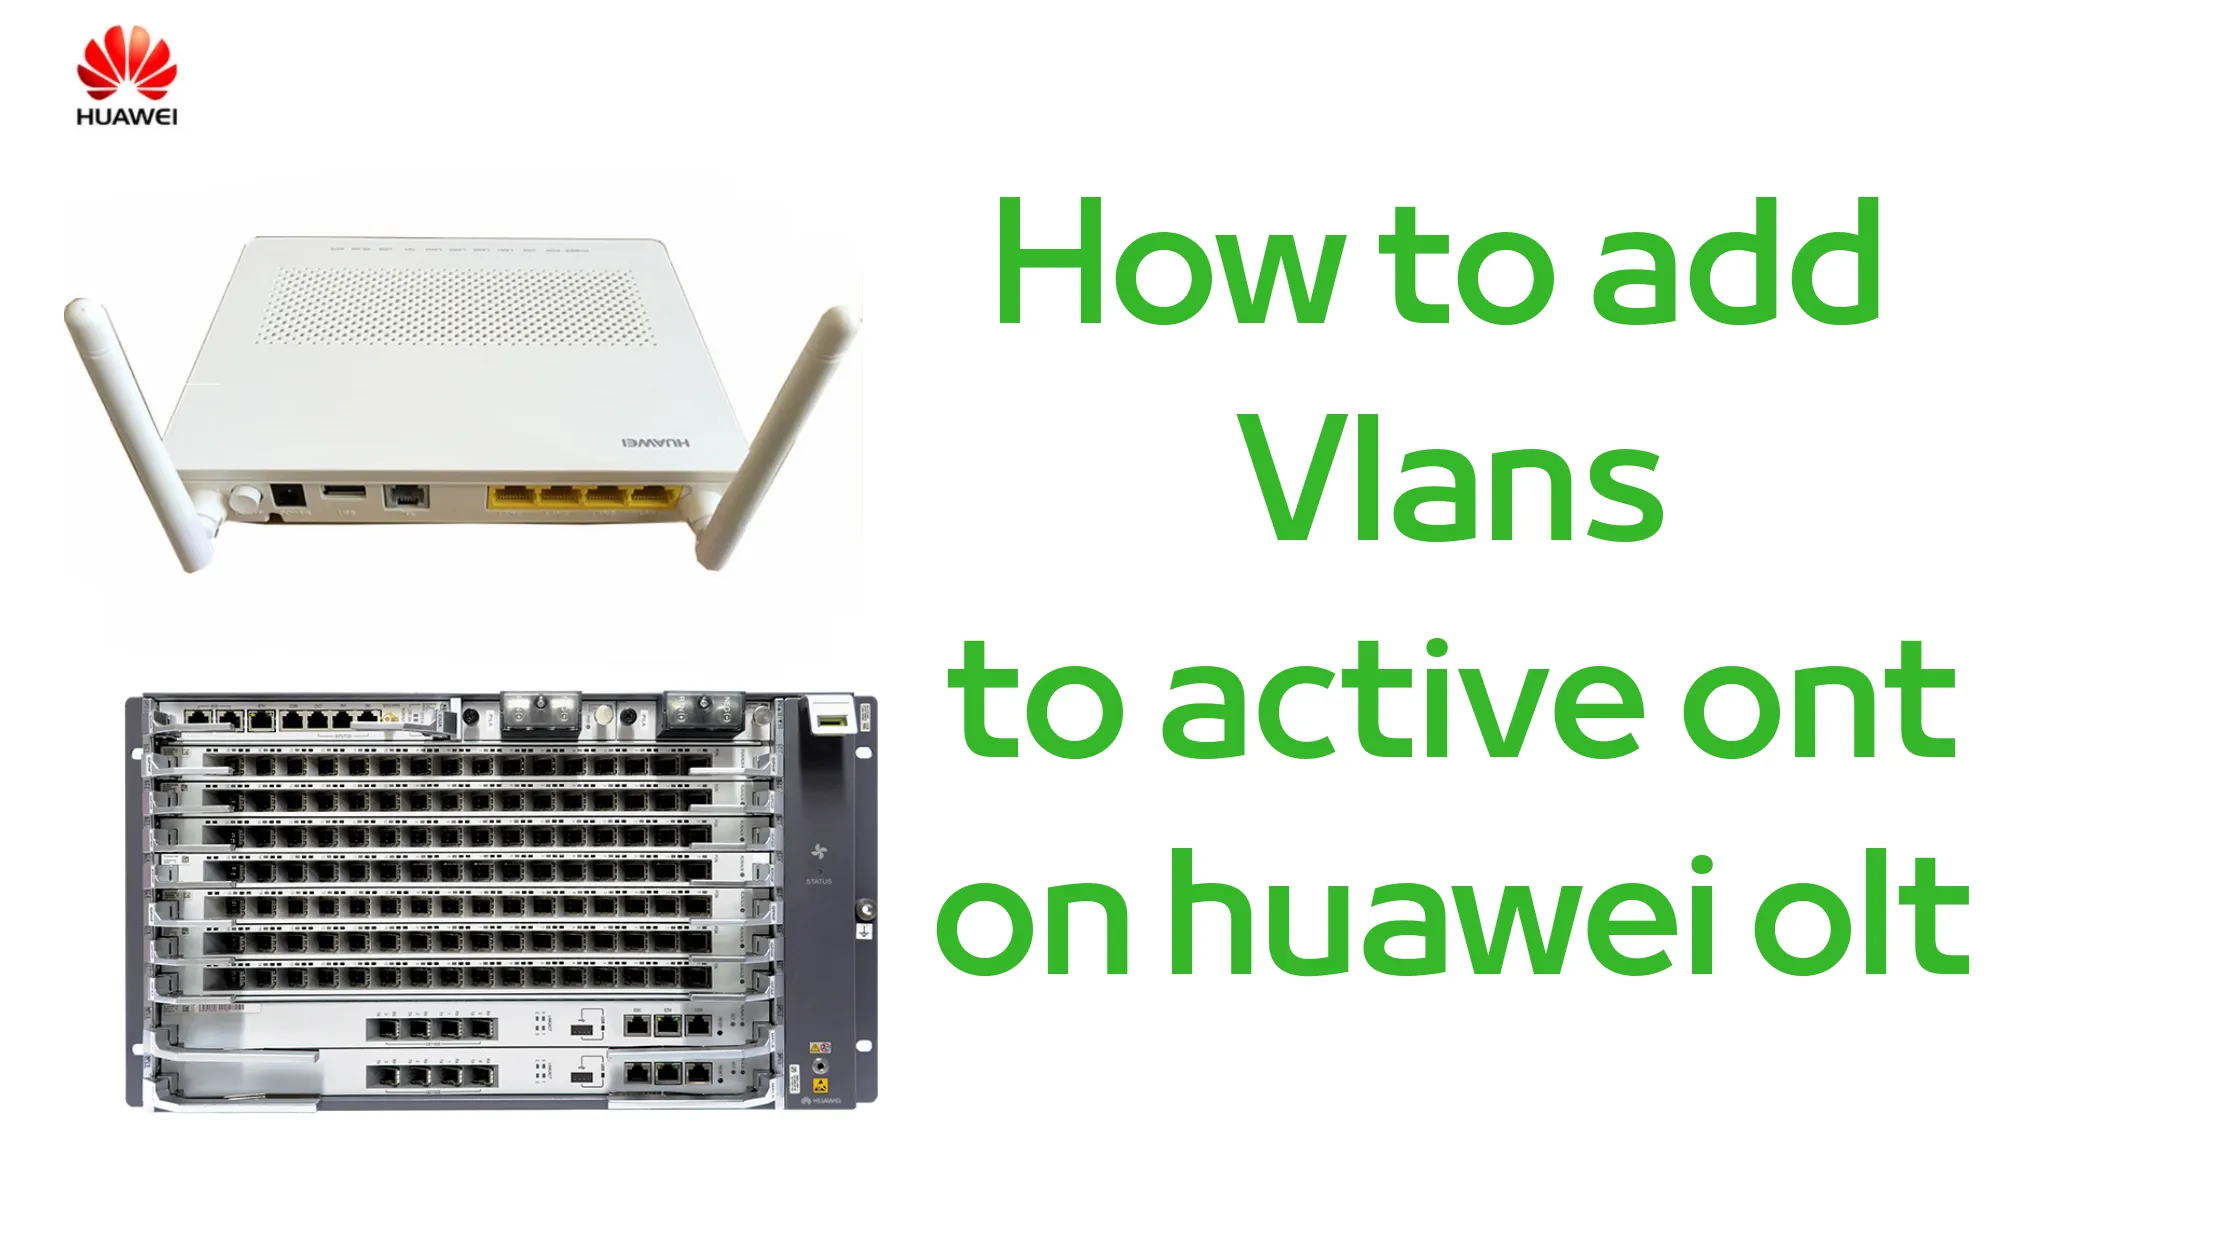 add VLANs to active ONT